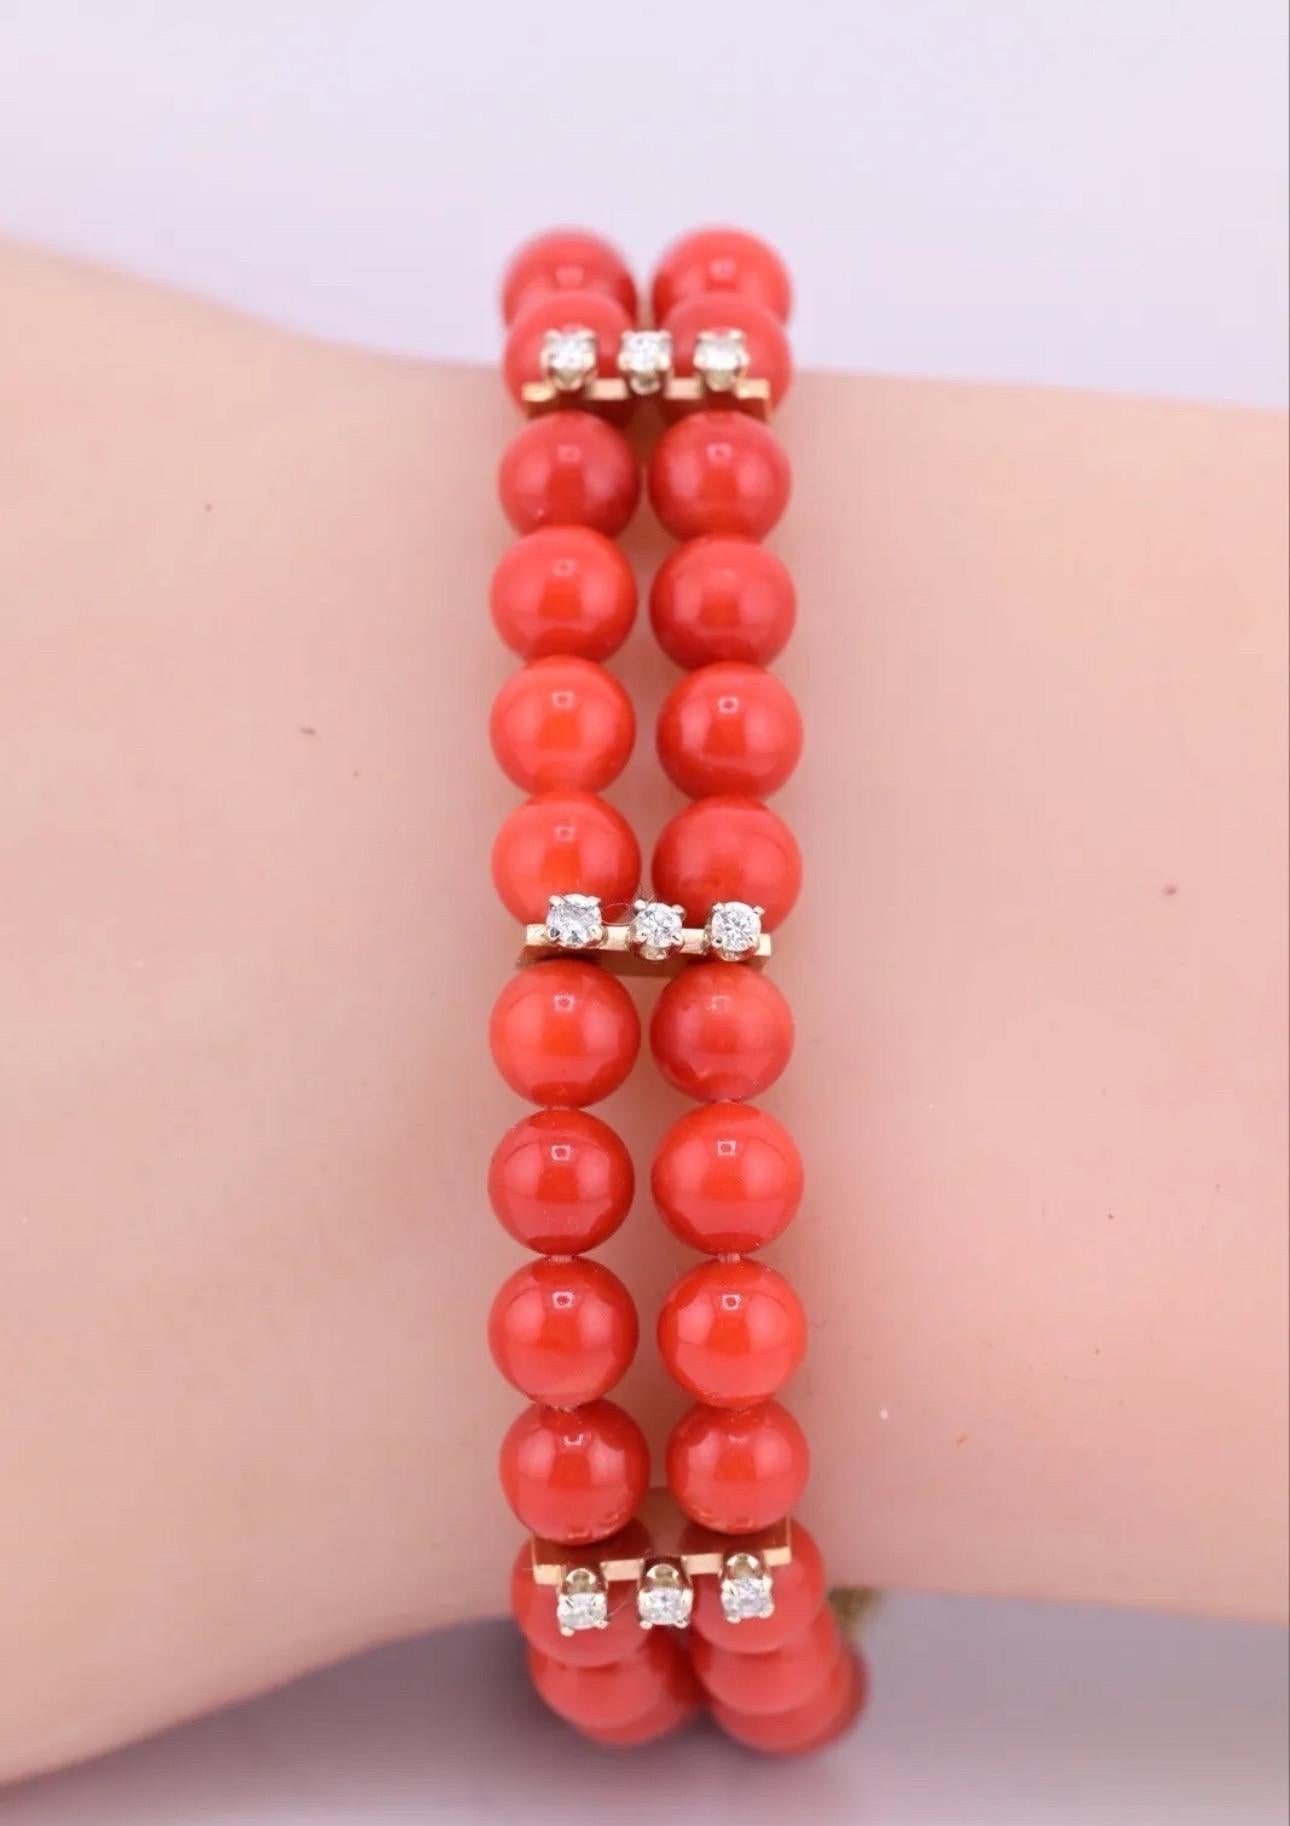 This stunning bracelet features exquisite blood red coral beads accented by natural diamonds. Crafted with 14k yellow gold, this beaded bracelet is a classic addition to any jewelry collection. The vibrant red color of the coral pairs perfectly with